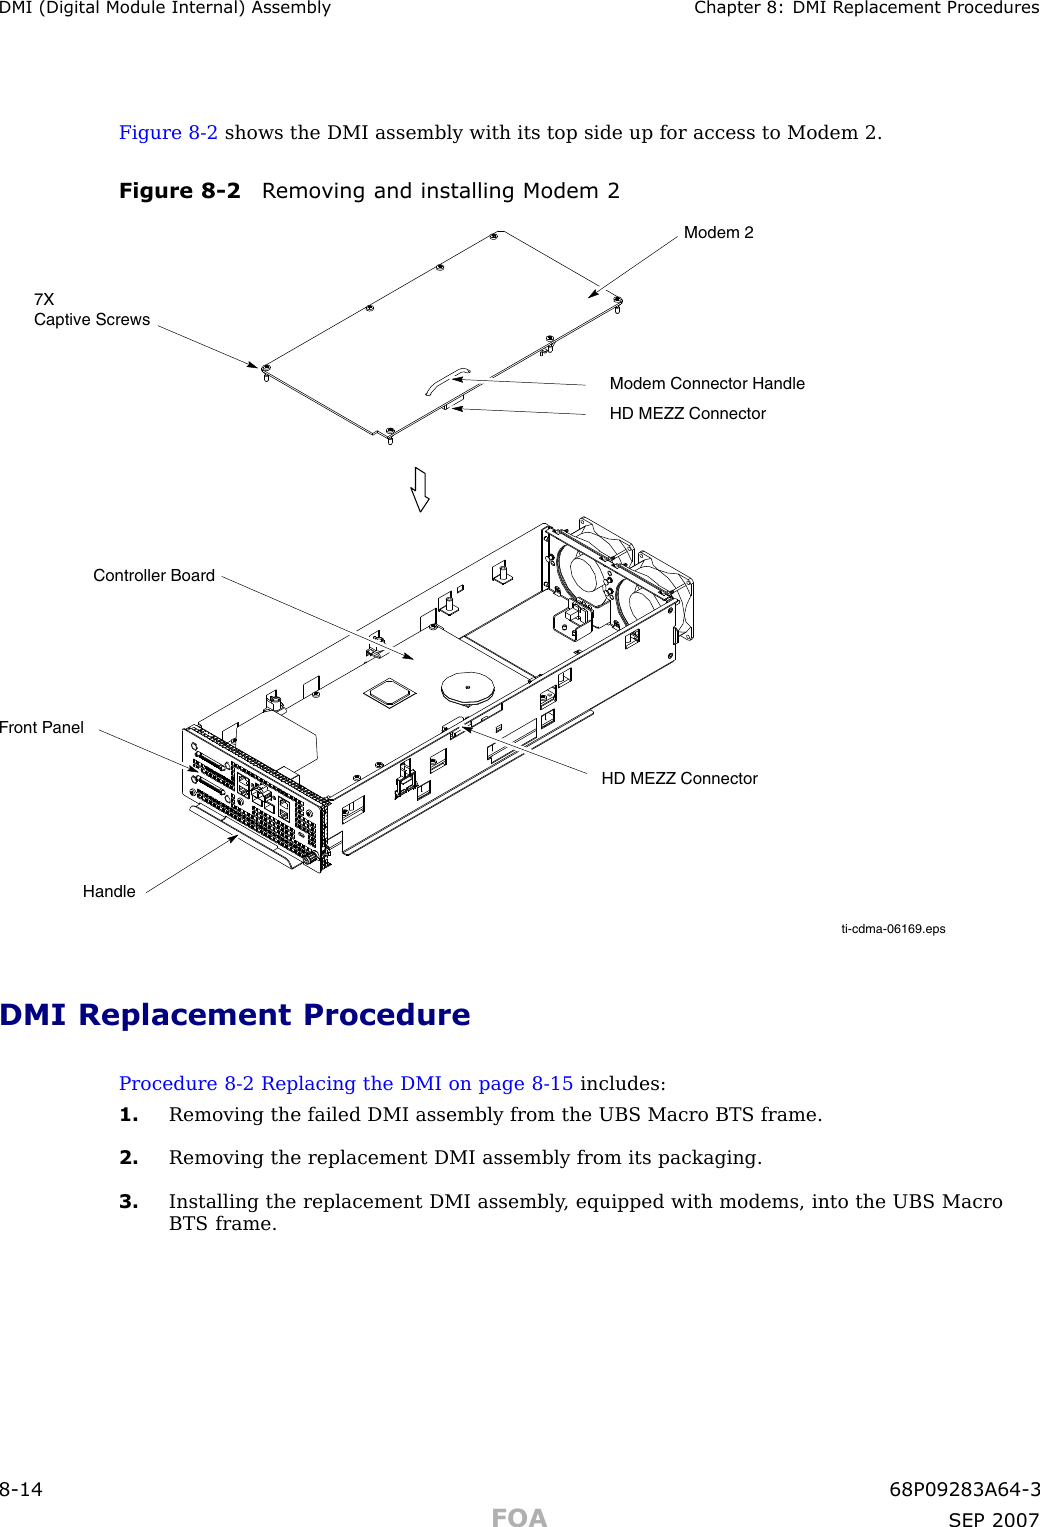 DMI (Digital Module Internal) Assembly Chapter 8: DMI R eplacement ProceduresFigure 8 -2 shows the DMI assembly with its top side up for access to Modem 2.Figure 8 -2 R emo ving and installing Modem 2ti-cdma-06169.eps7X Captive ScrewsModem 2Front PanelHD MEZZ ConnectorModem Connector HandleHD MEZZ ConnectorController BoardHandleDMI Replacement ProcedureProcedure 8 -2 Replacing the DMI on page 8 - 15 includes:1. Removing the failed DMI assembly from the UBS Macro BTS frame.2. Removing the replacement DMI assembly from its packaging.3. Installing the replacement DMI assembly , equipped with modems, into the UBS MacroBTS frame.8 -14 68P09283A64 -3FOA SEP 2007